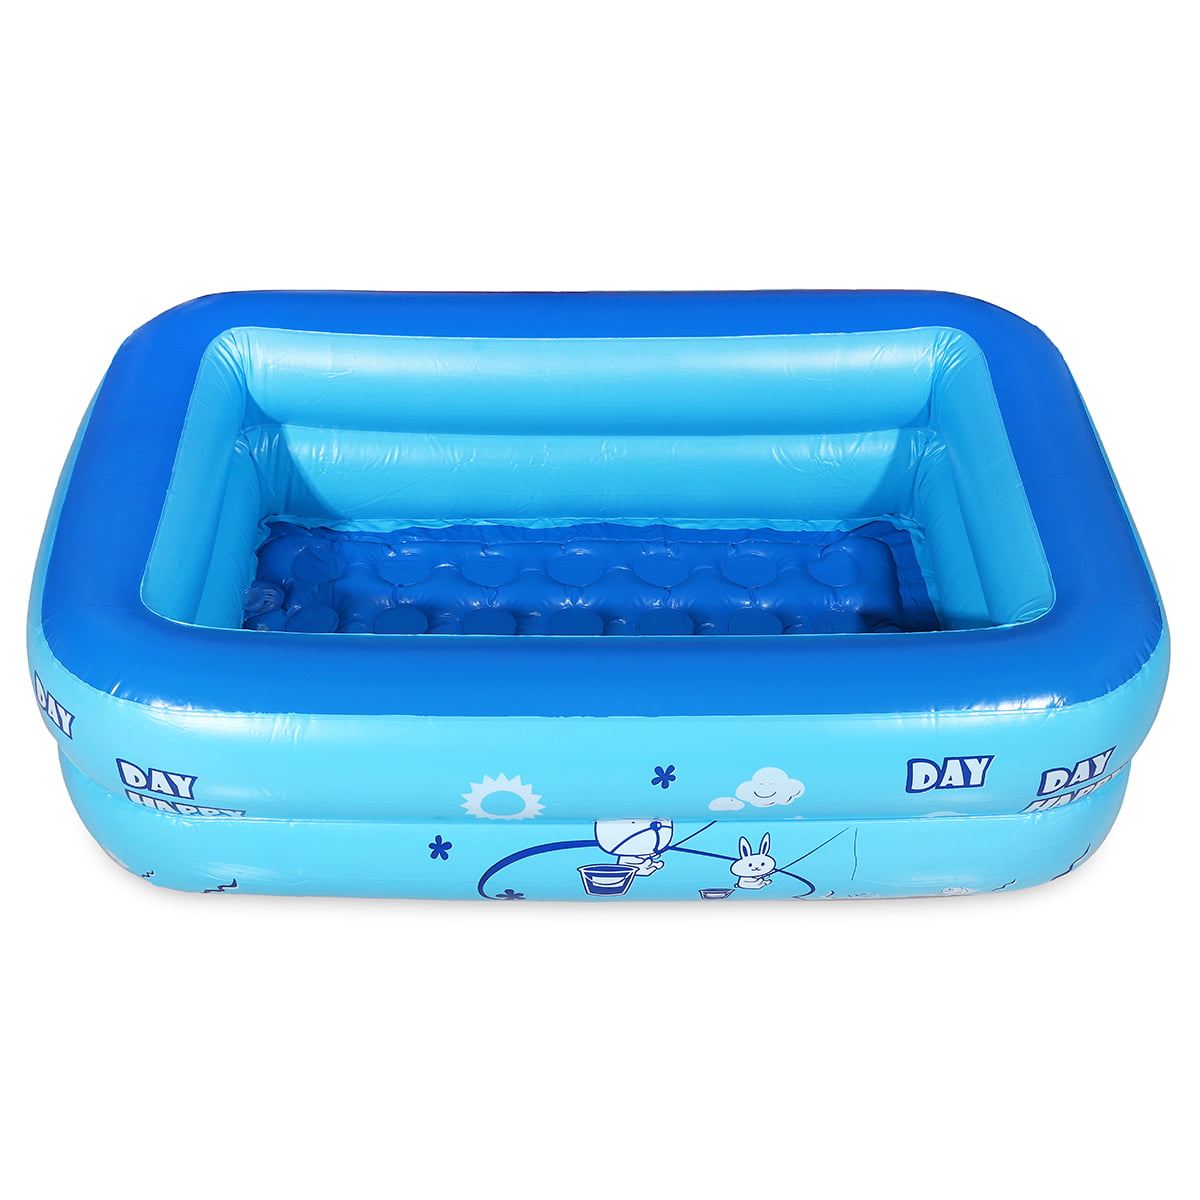 Buoy Ect. Baby Kids Inflatable Swimming Bath Pool with Foot Air Pump Pit Balls